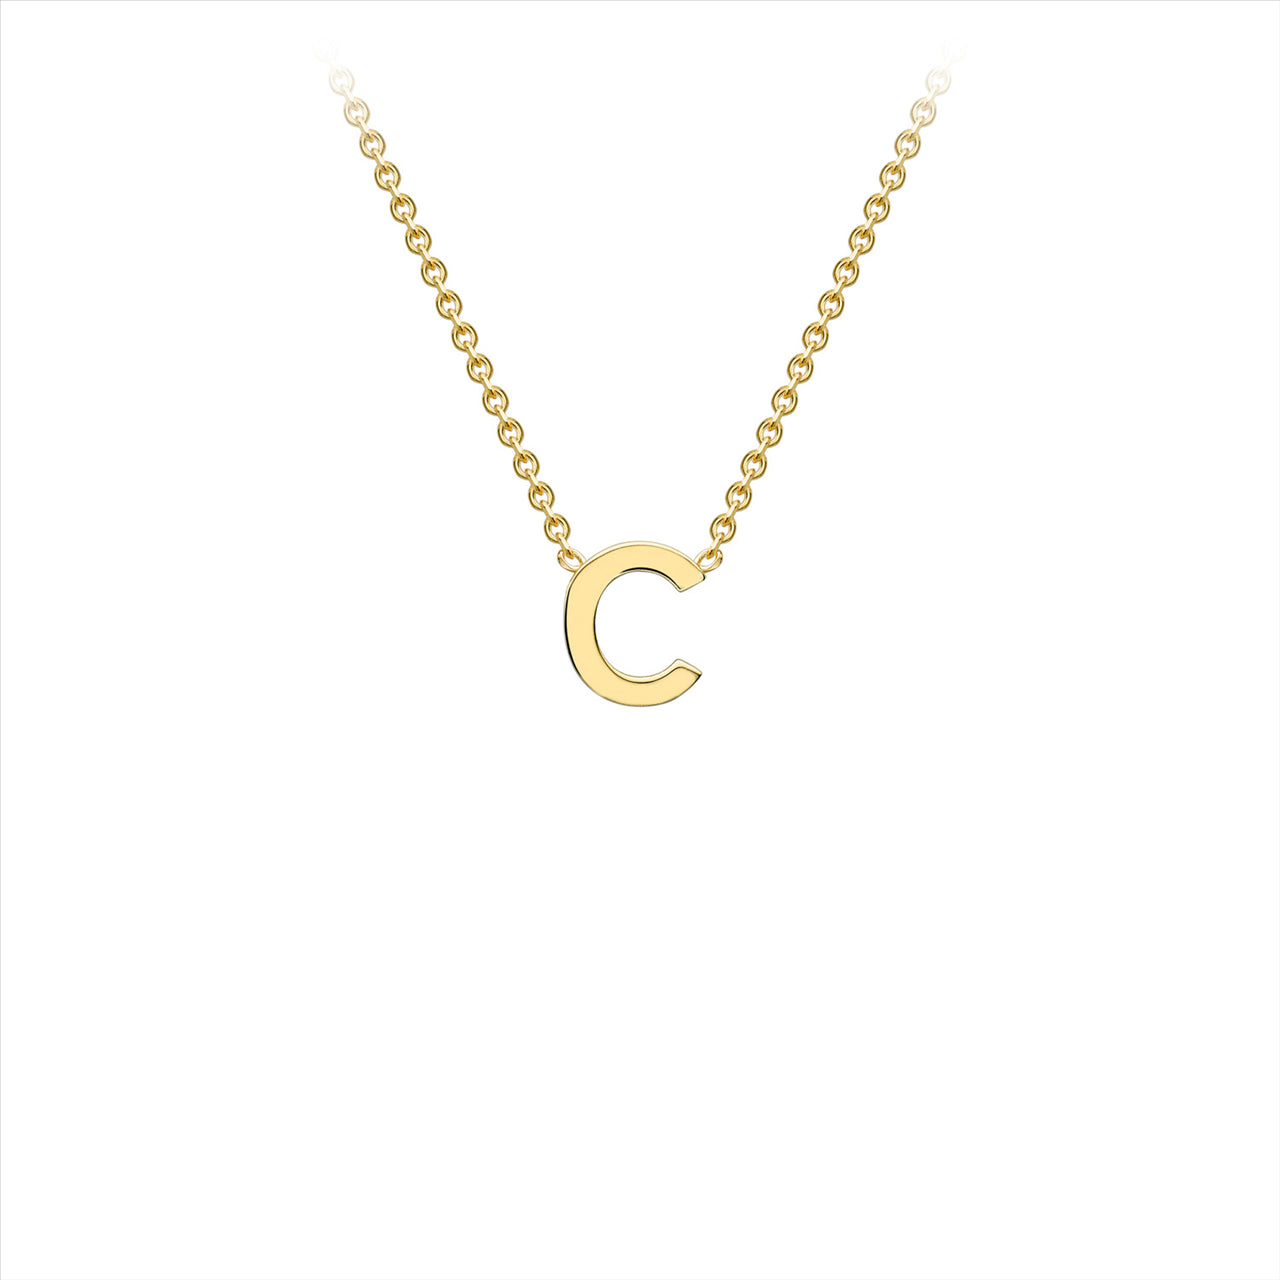 9ct Yellow Gold Petite Initial "C" Necklace